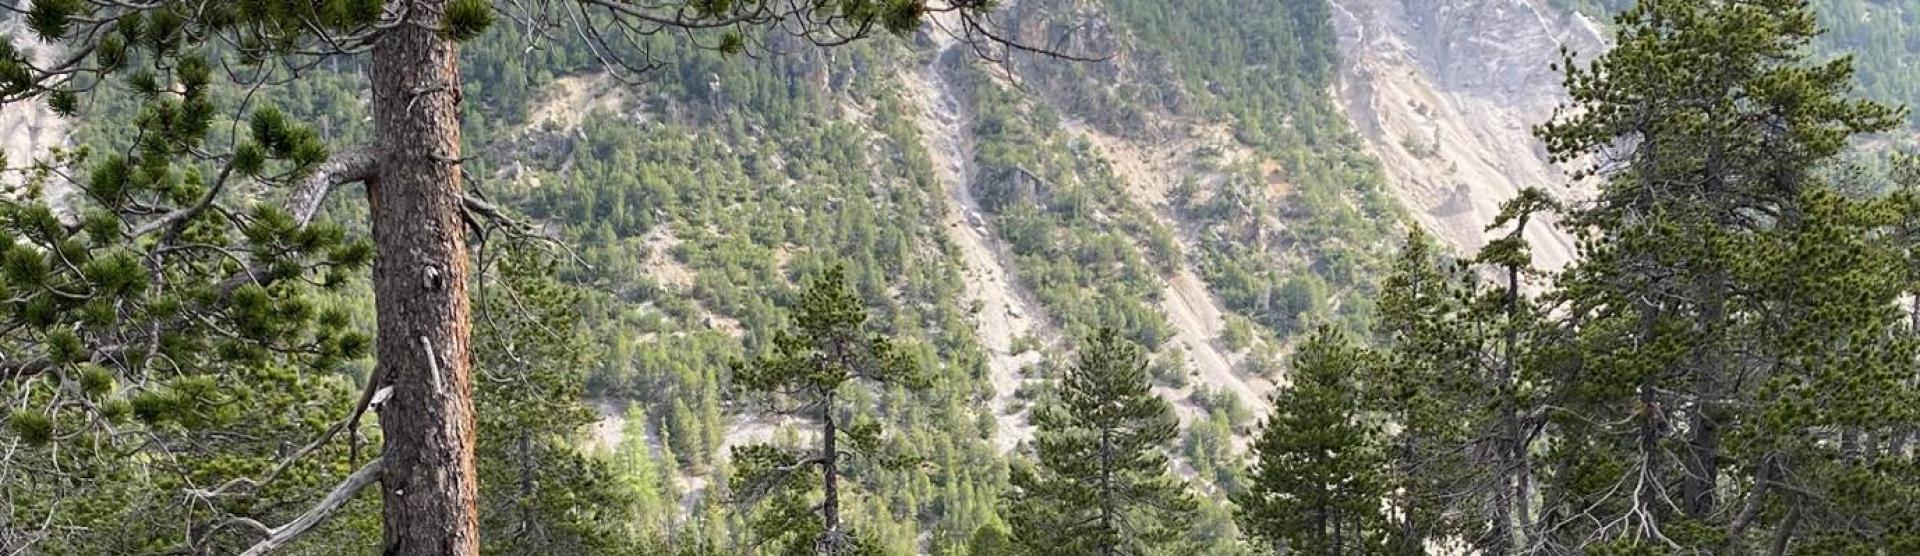 Trees affected by debris flow events in Alps